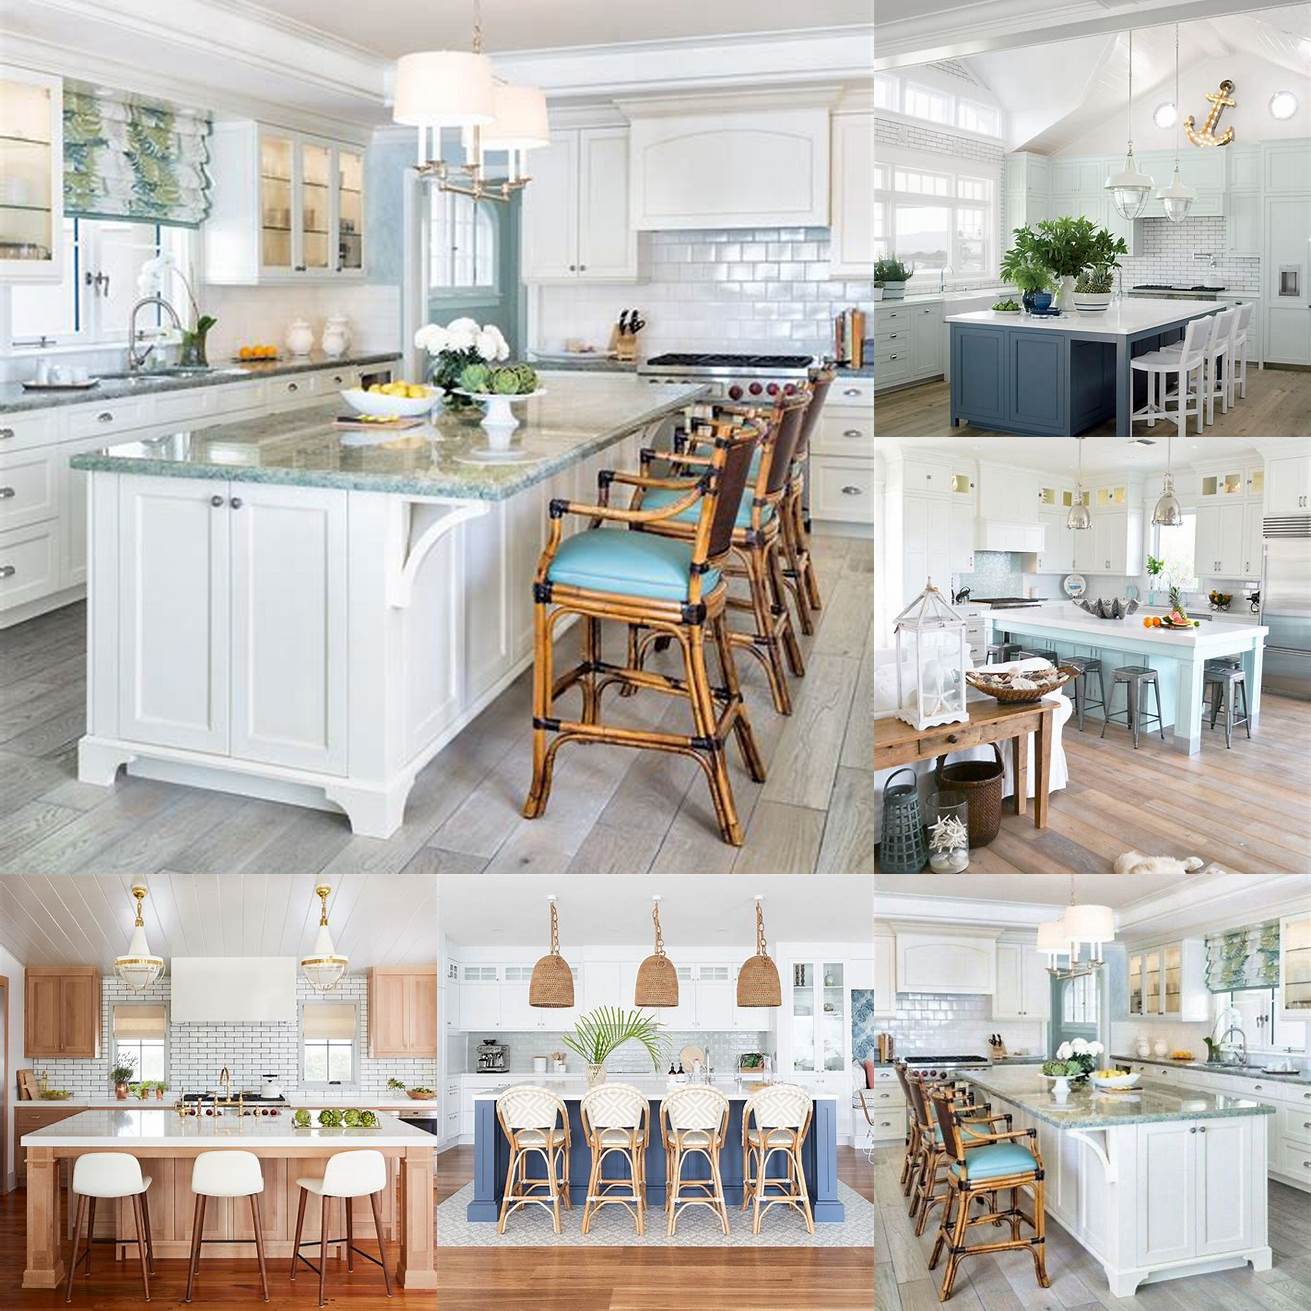 Coastal-inspired kitchen with bright white walls light wood flooring and nautical-themed decor The open shelving and glass-front cabinets allow for easy storage and display of beachy accessories